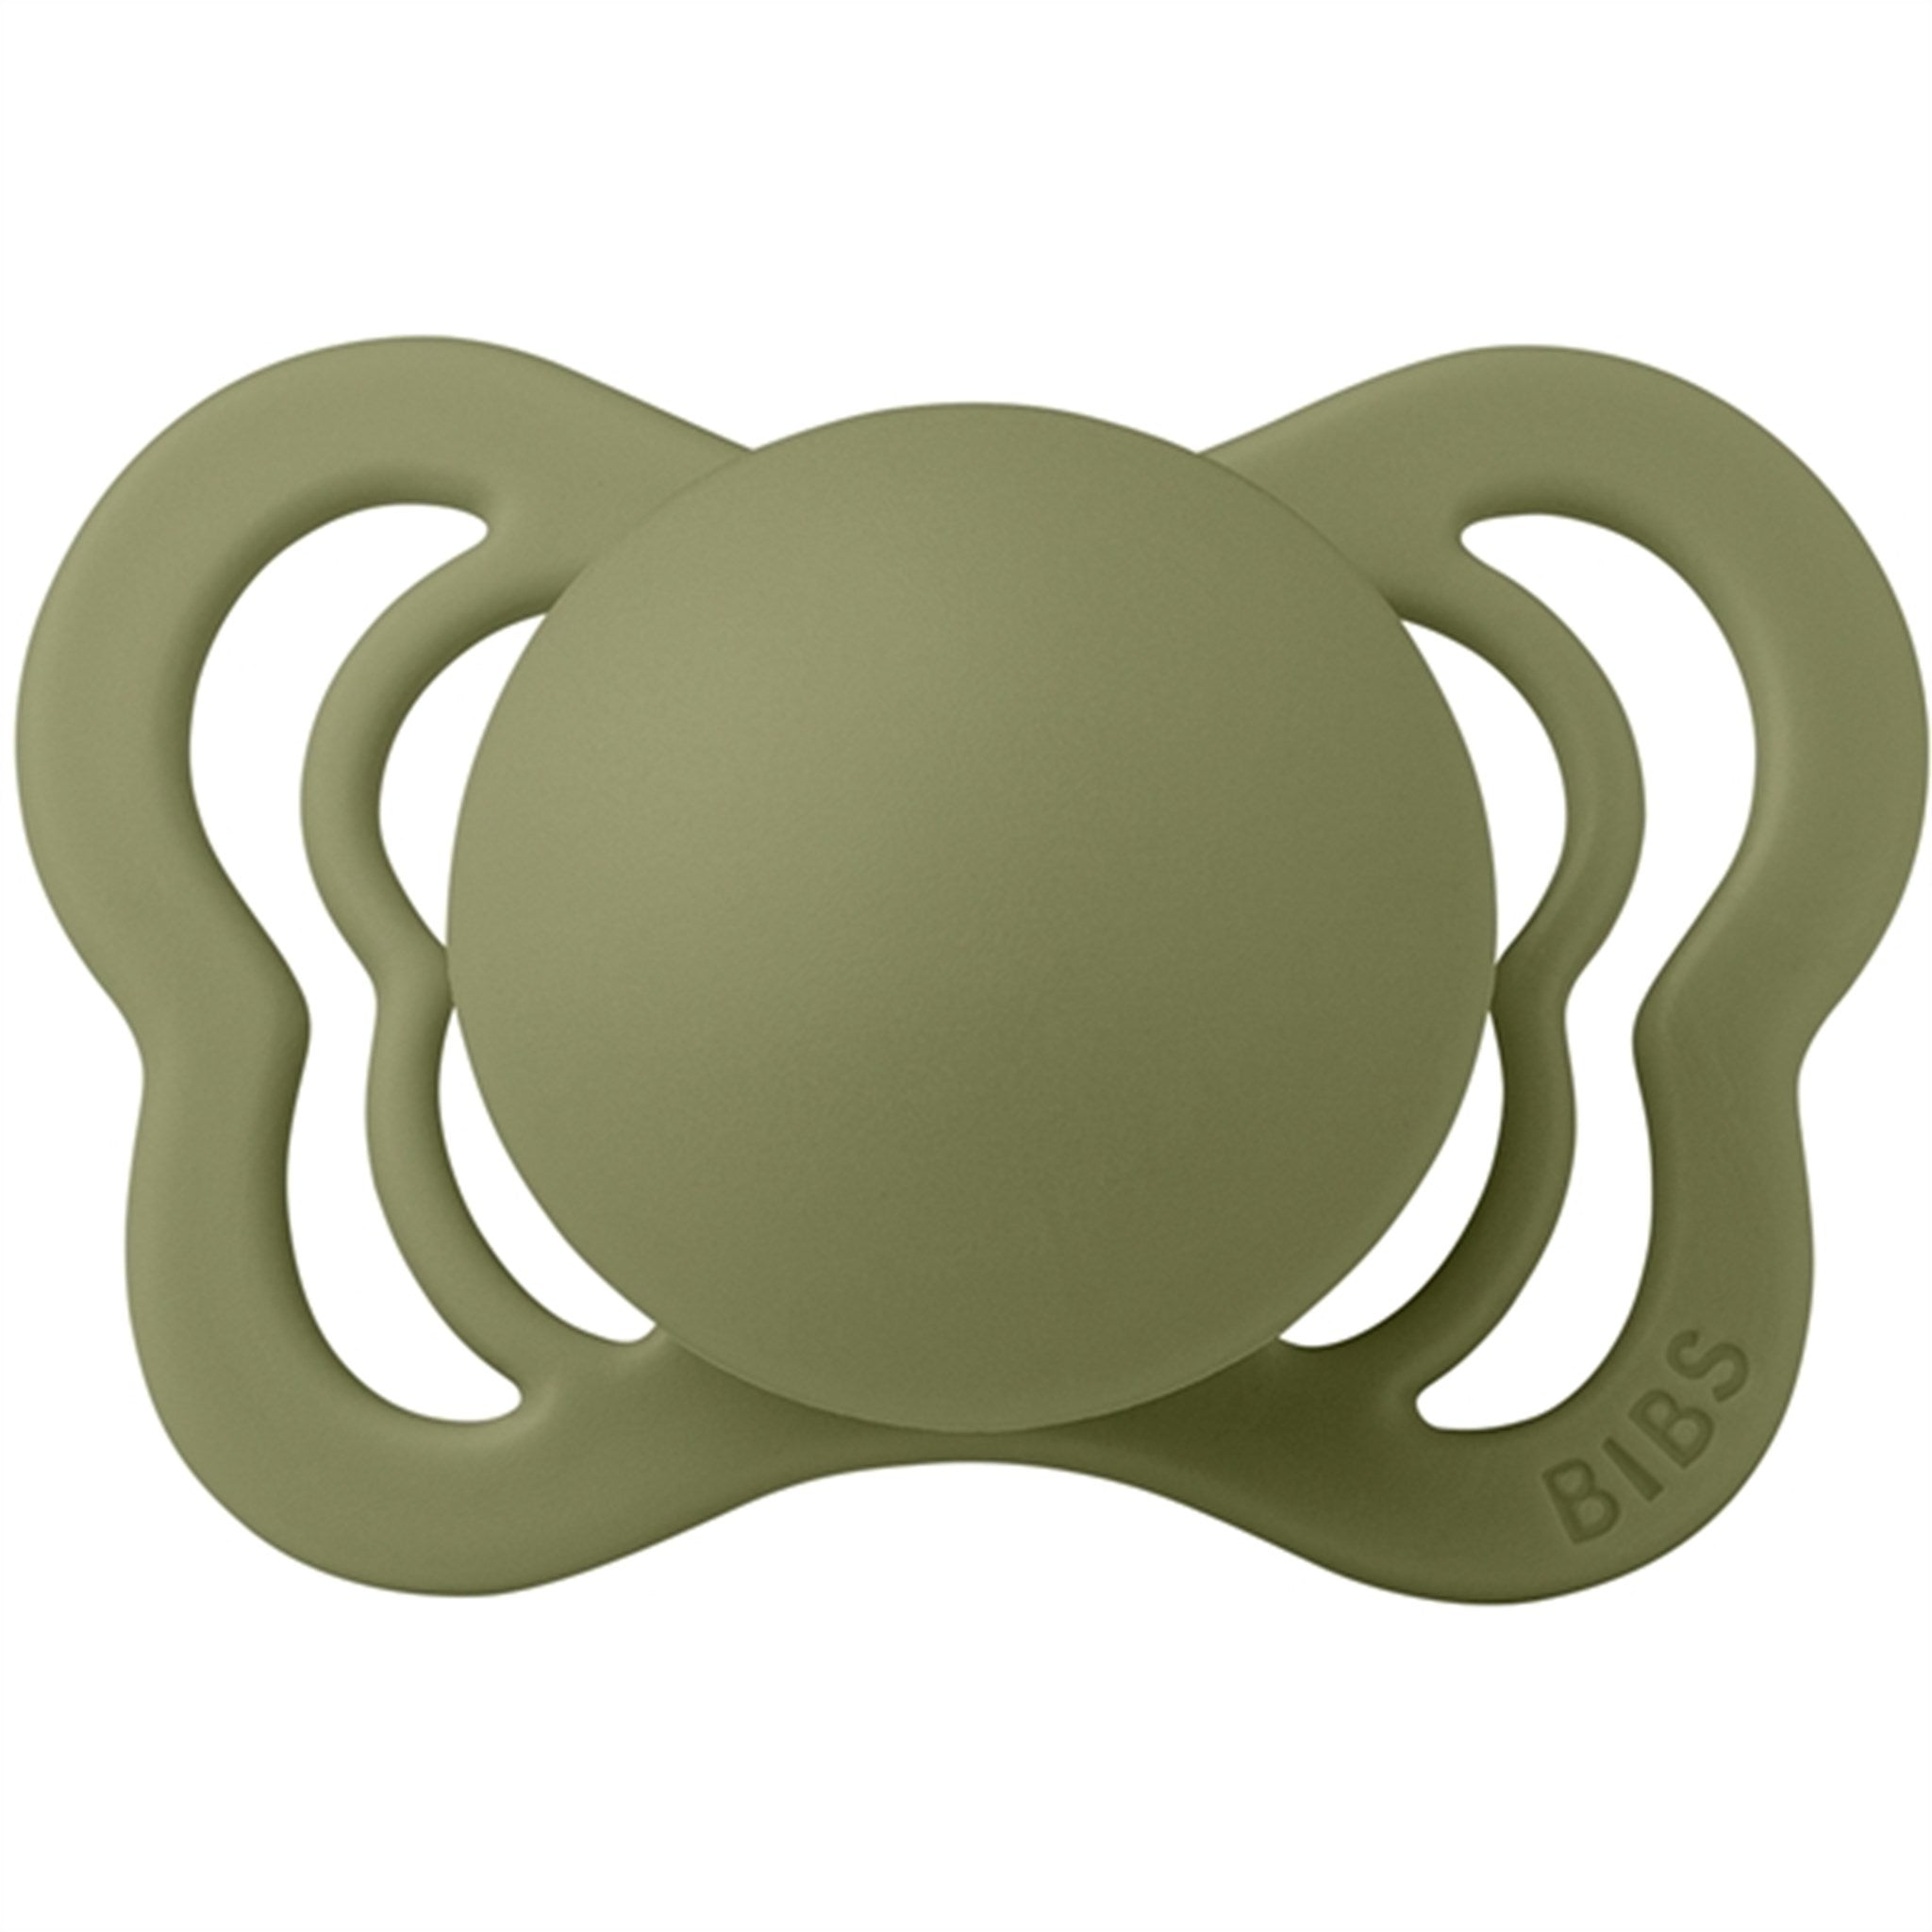 Bibs Couture Latex Pacifiers 2-pak Anatomical Honey Bee/Olive 3